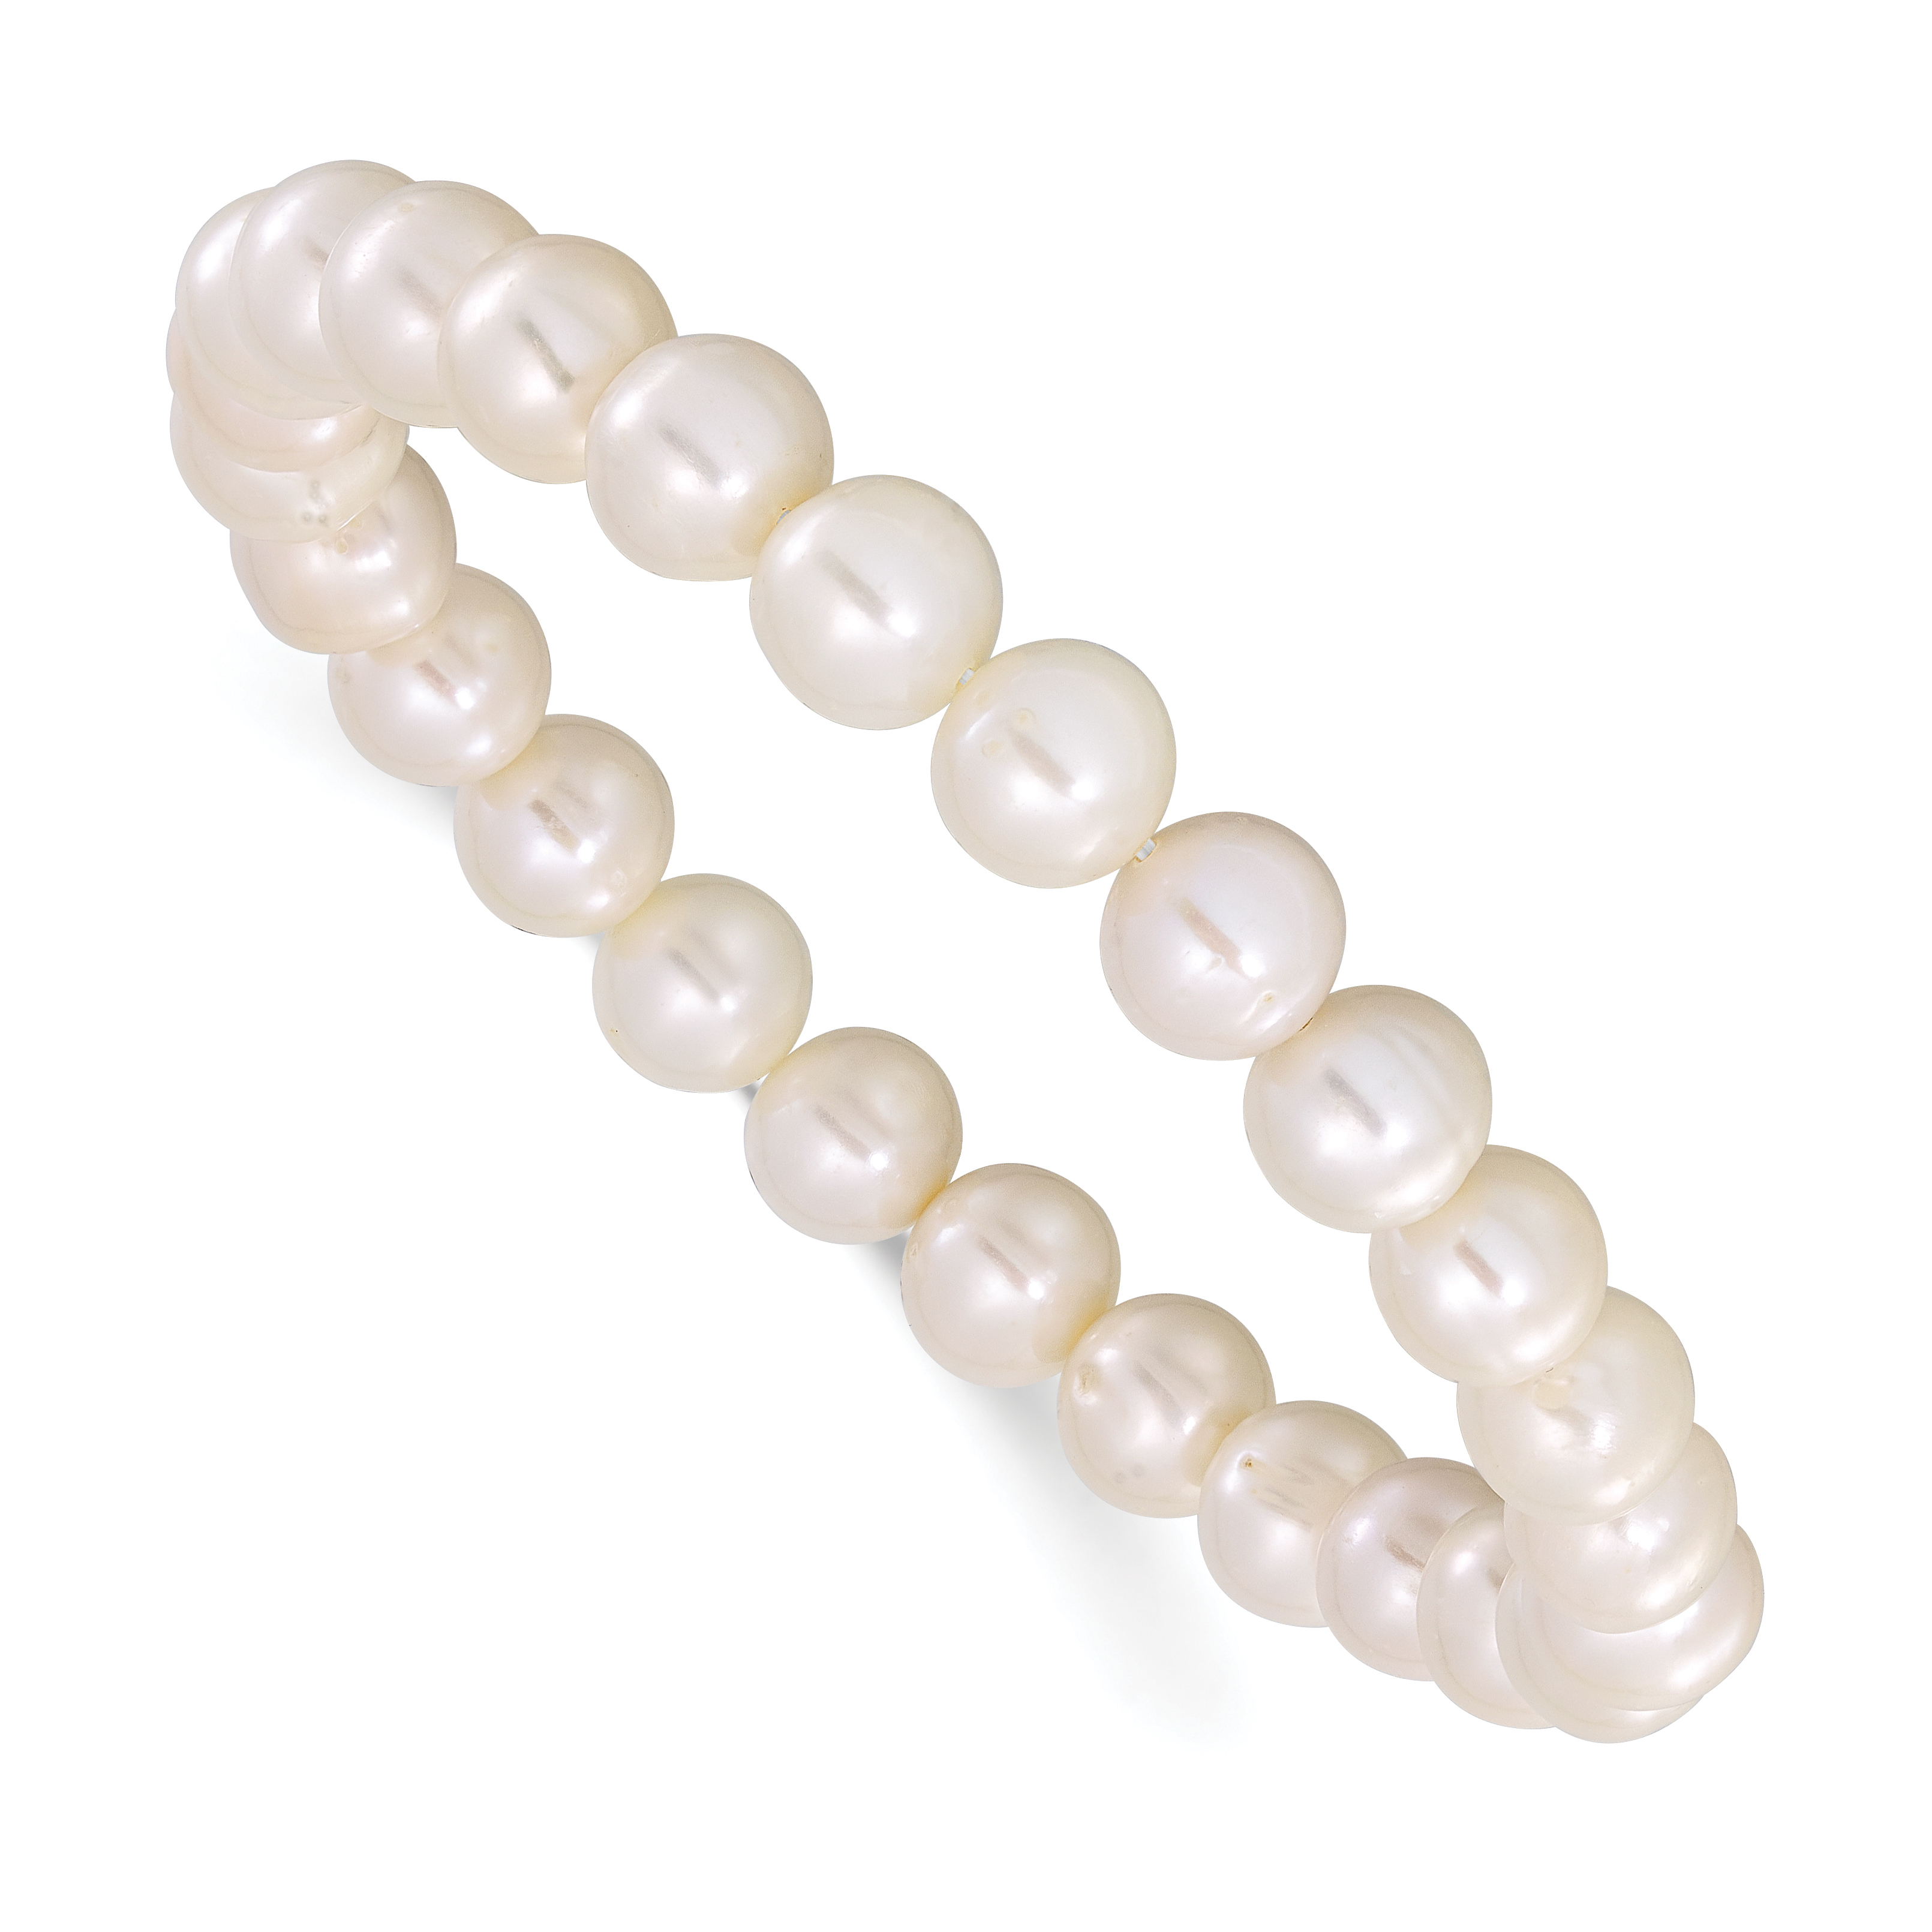 18K Gold-Plated Charles Garnier Weave Bracelet Adorned With Two Cultured  Freshwater Pearls And A Pave Of Simulated Diamonds